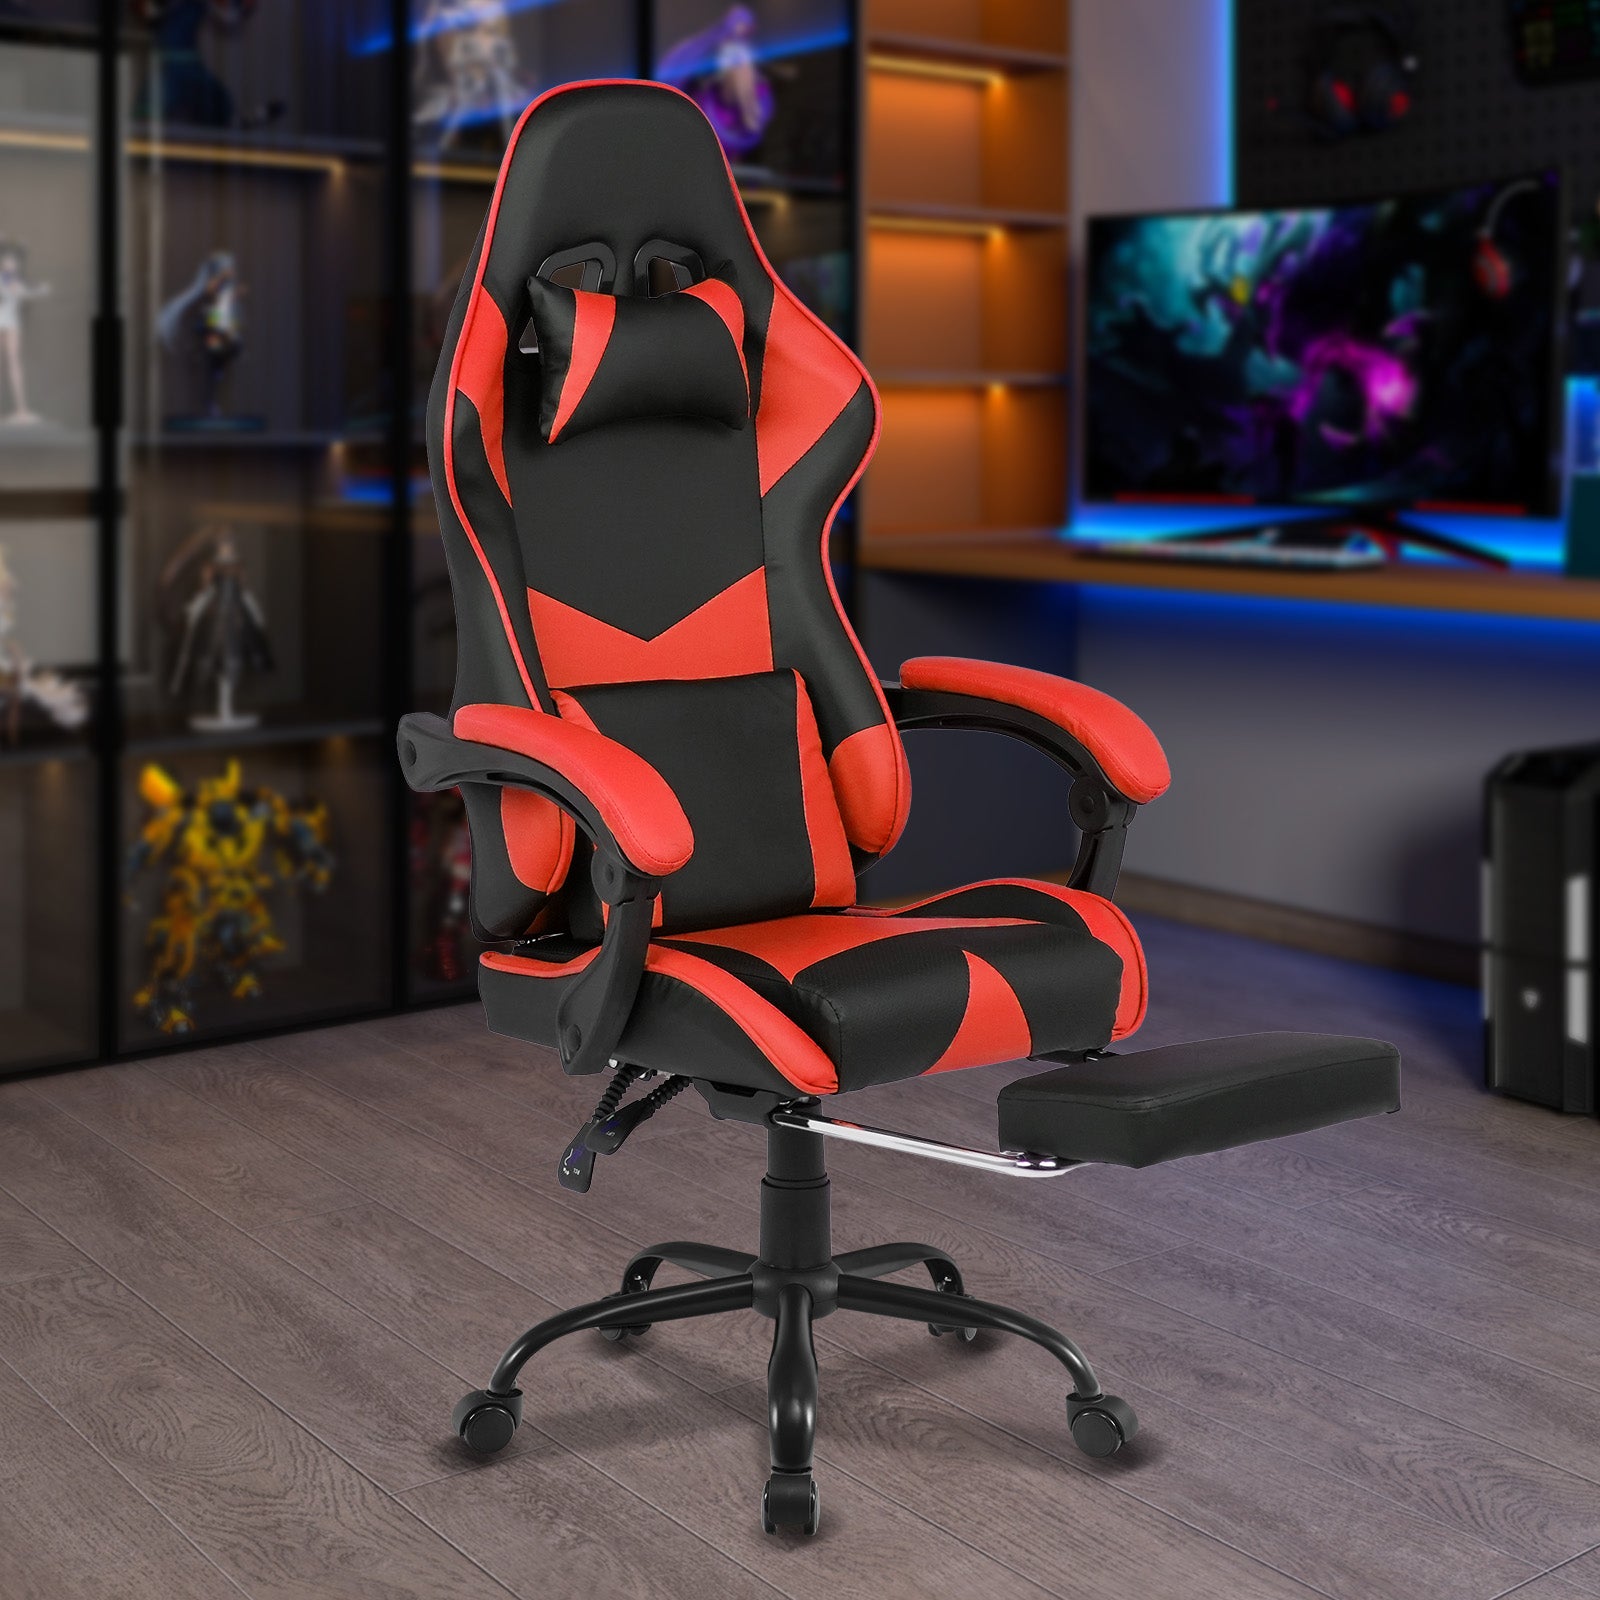 Advwin Gaming Office Chair Racing Recliner Ergonoric Support Seat with Footrest PU Leather in Red & Black